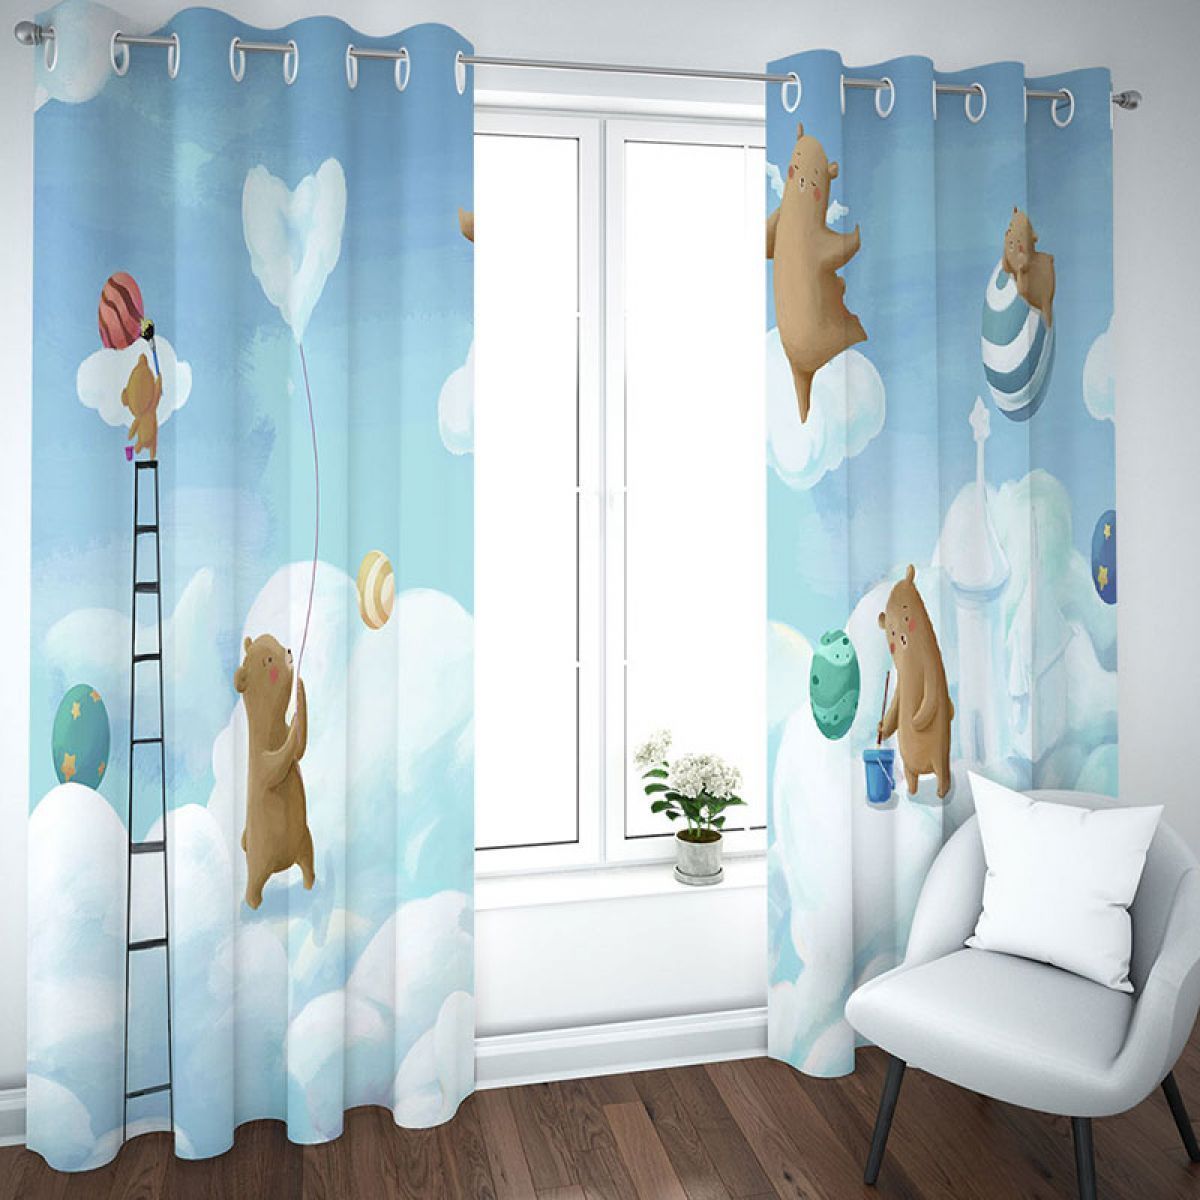 3d bear on the clouds printed window curtain home decor 2019